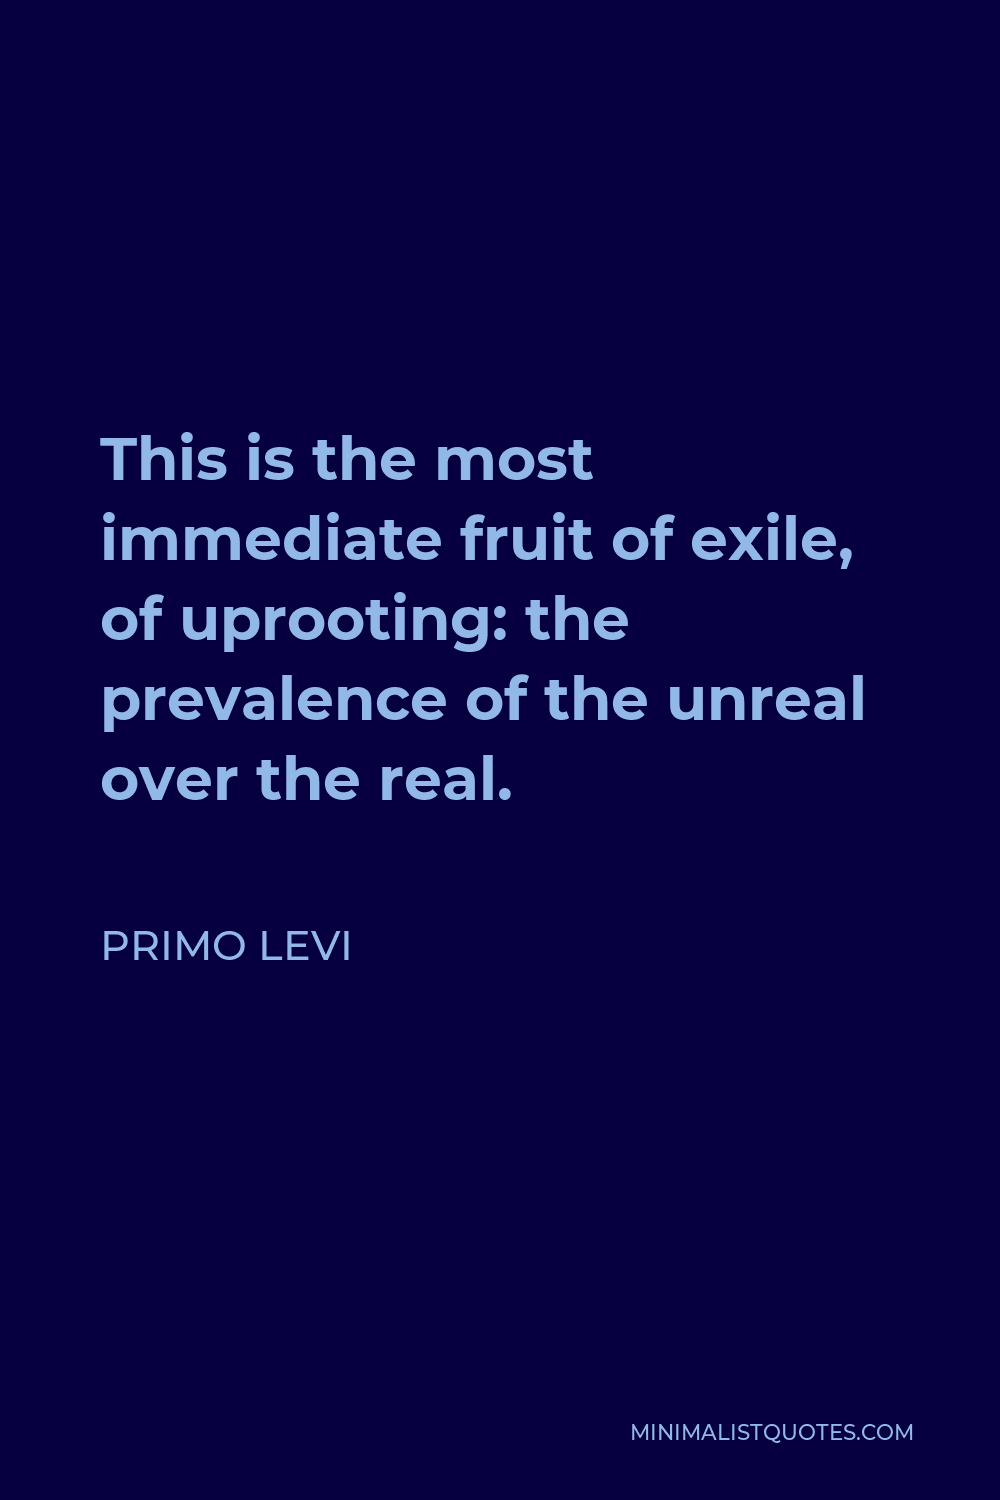 Primo Levi Quote - This is the most immediate fruit of exile, of uprooting: the prevalence of the unreal over the real.